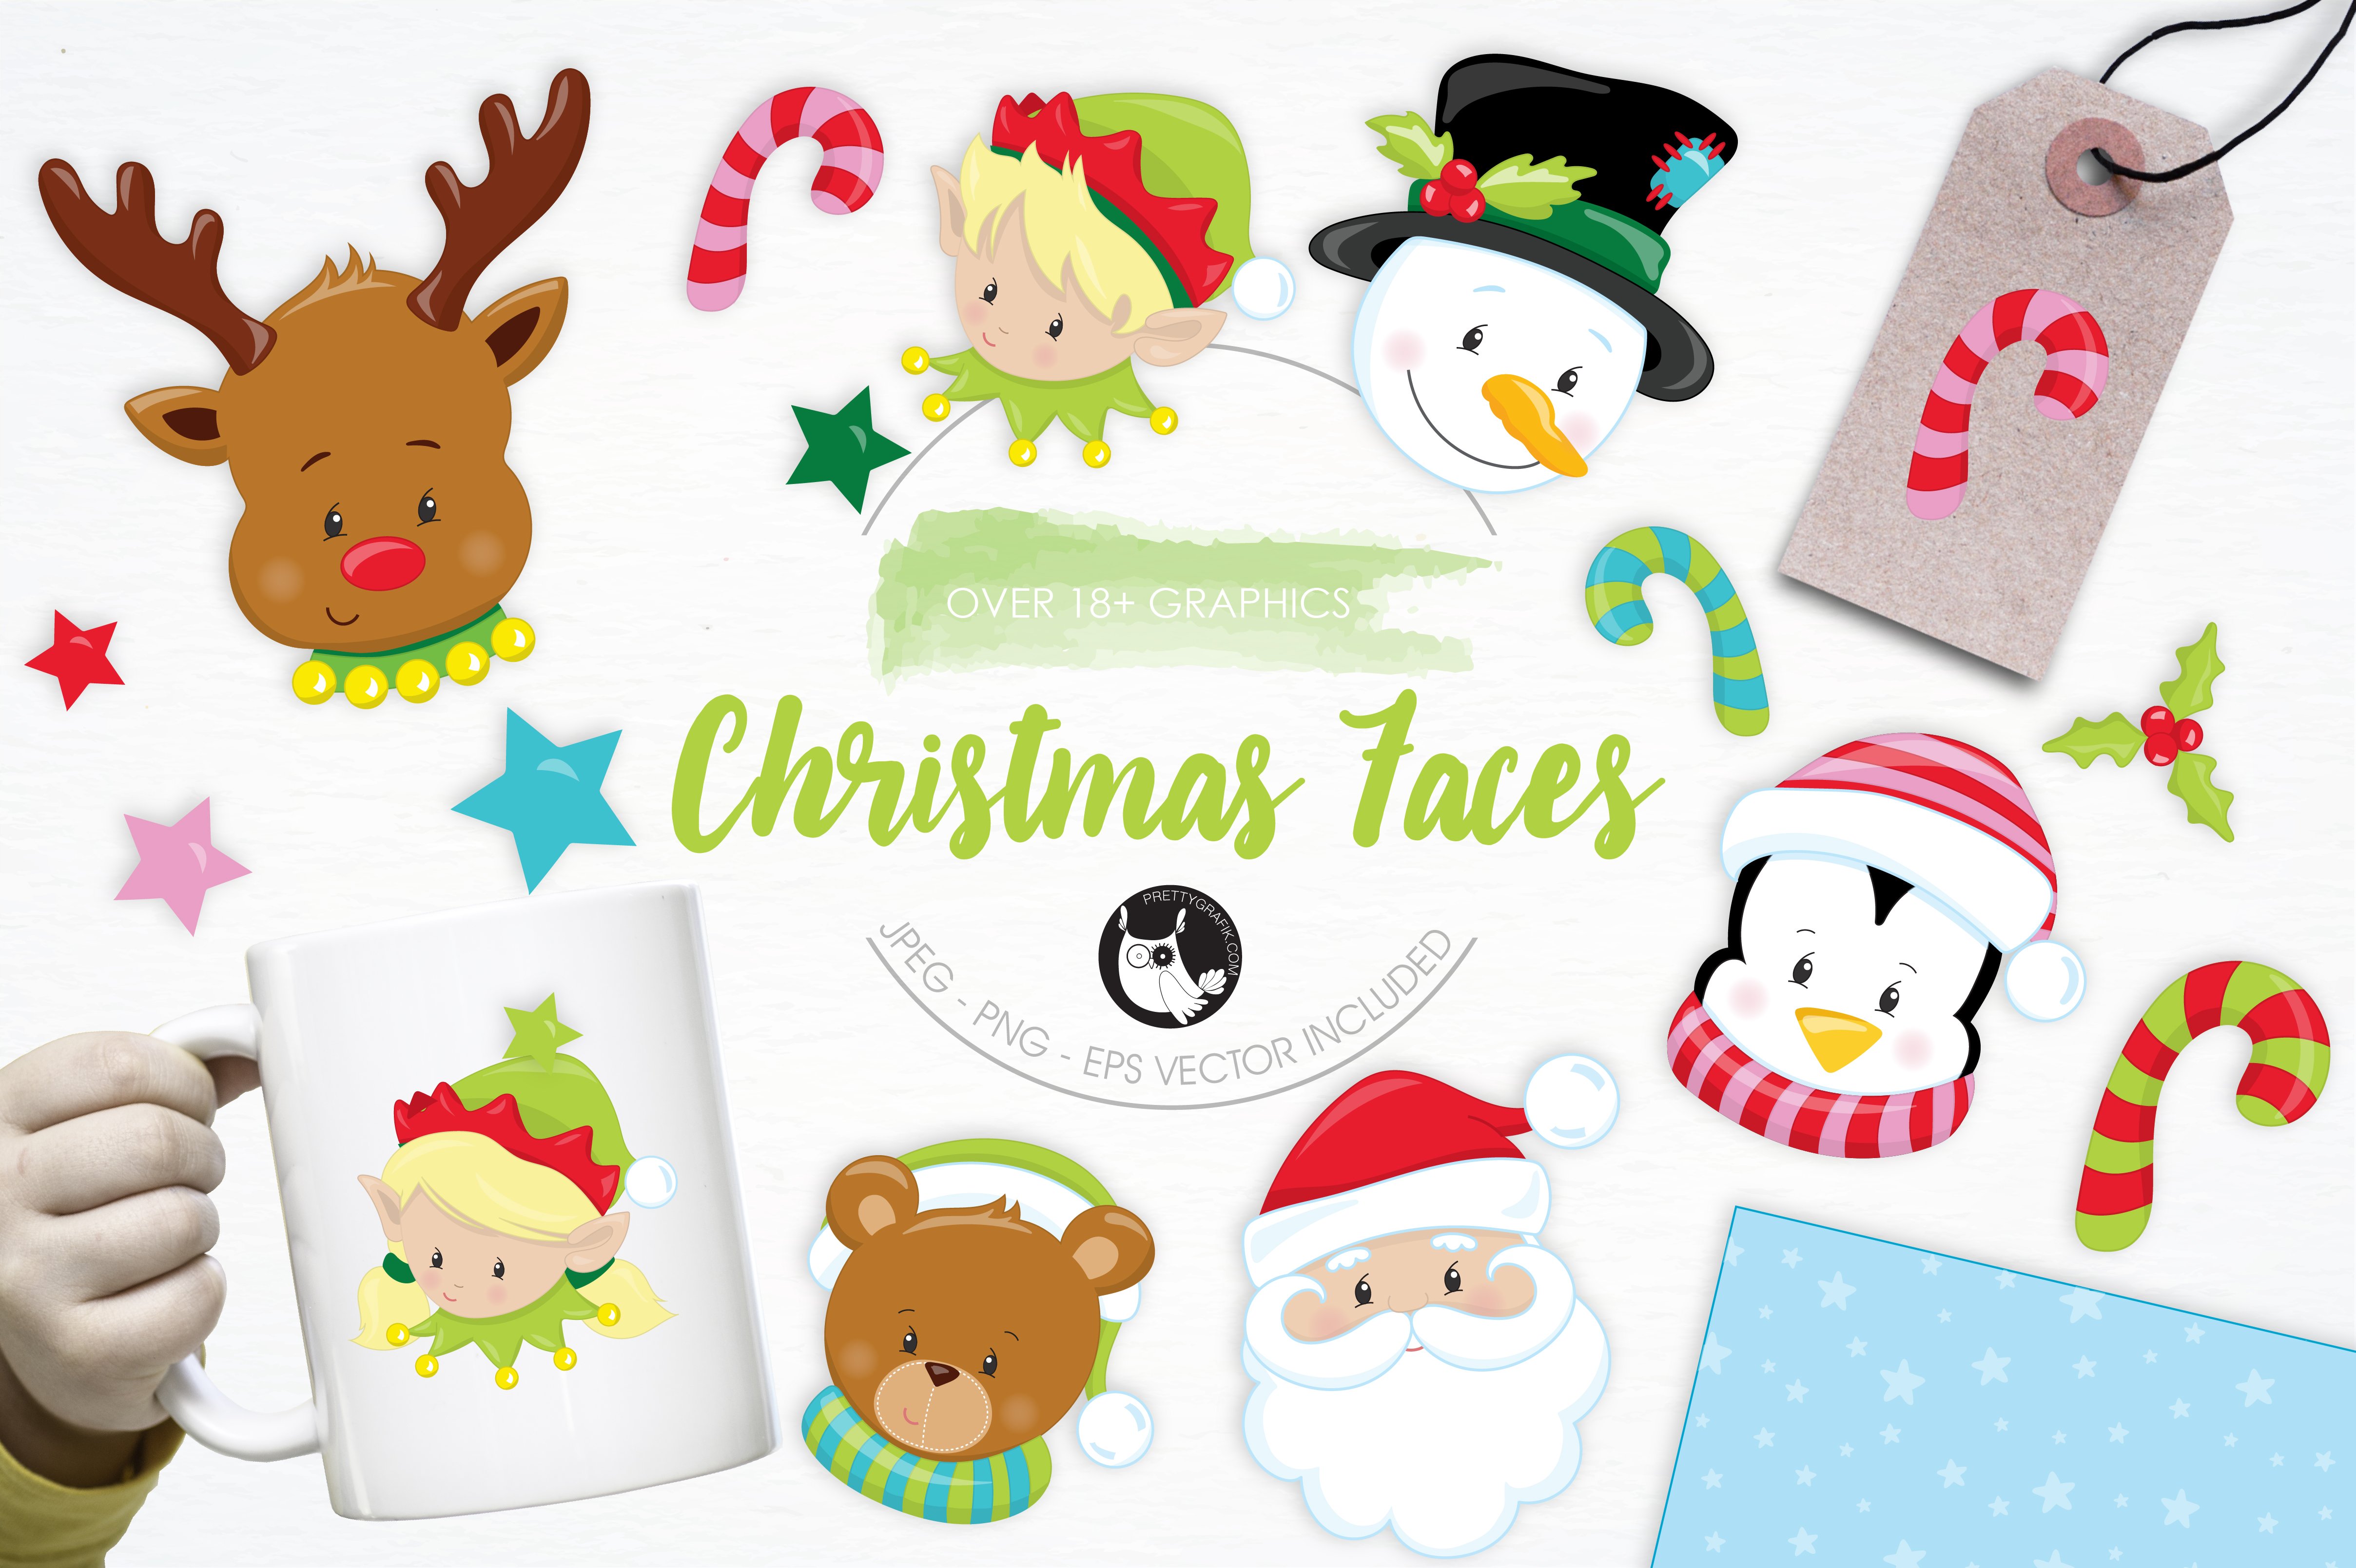 Christmas Faces illustration pack - Vector Image